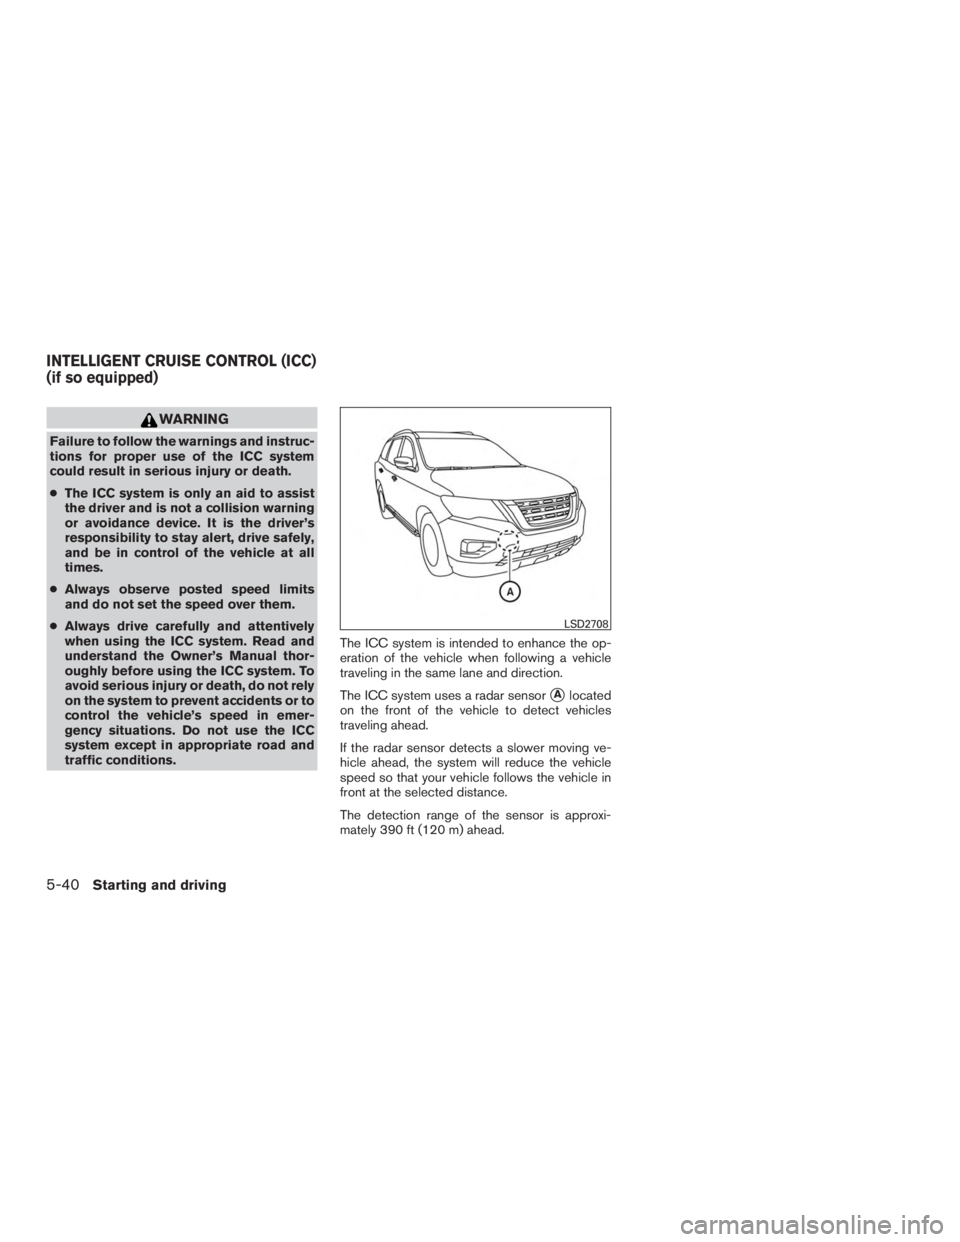 NISSAN PATHFINDER PLATINUM 2016  Owners Manual WARNING
Failure to follow the warnings and instruc-
tions for proper use of the ICC system
could result in serious injury or death.
●The ICC system is only an aid to assist
the driver and is not a c